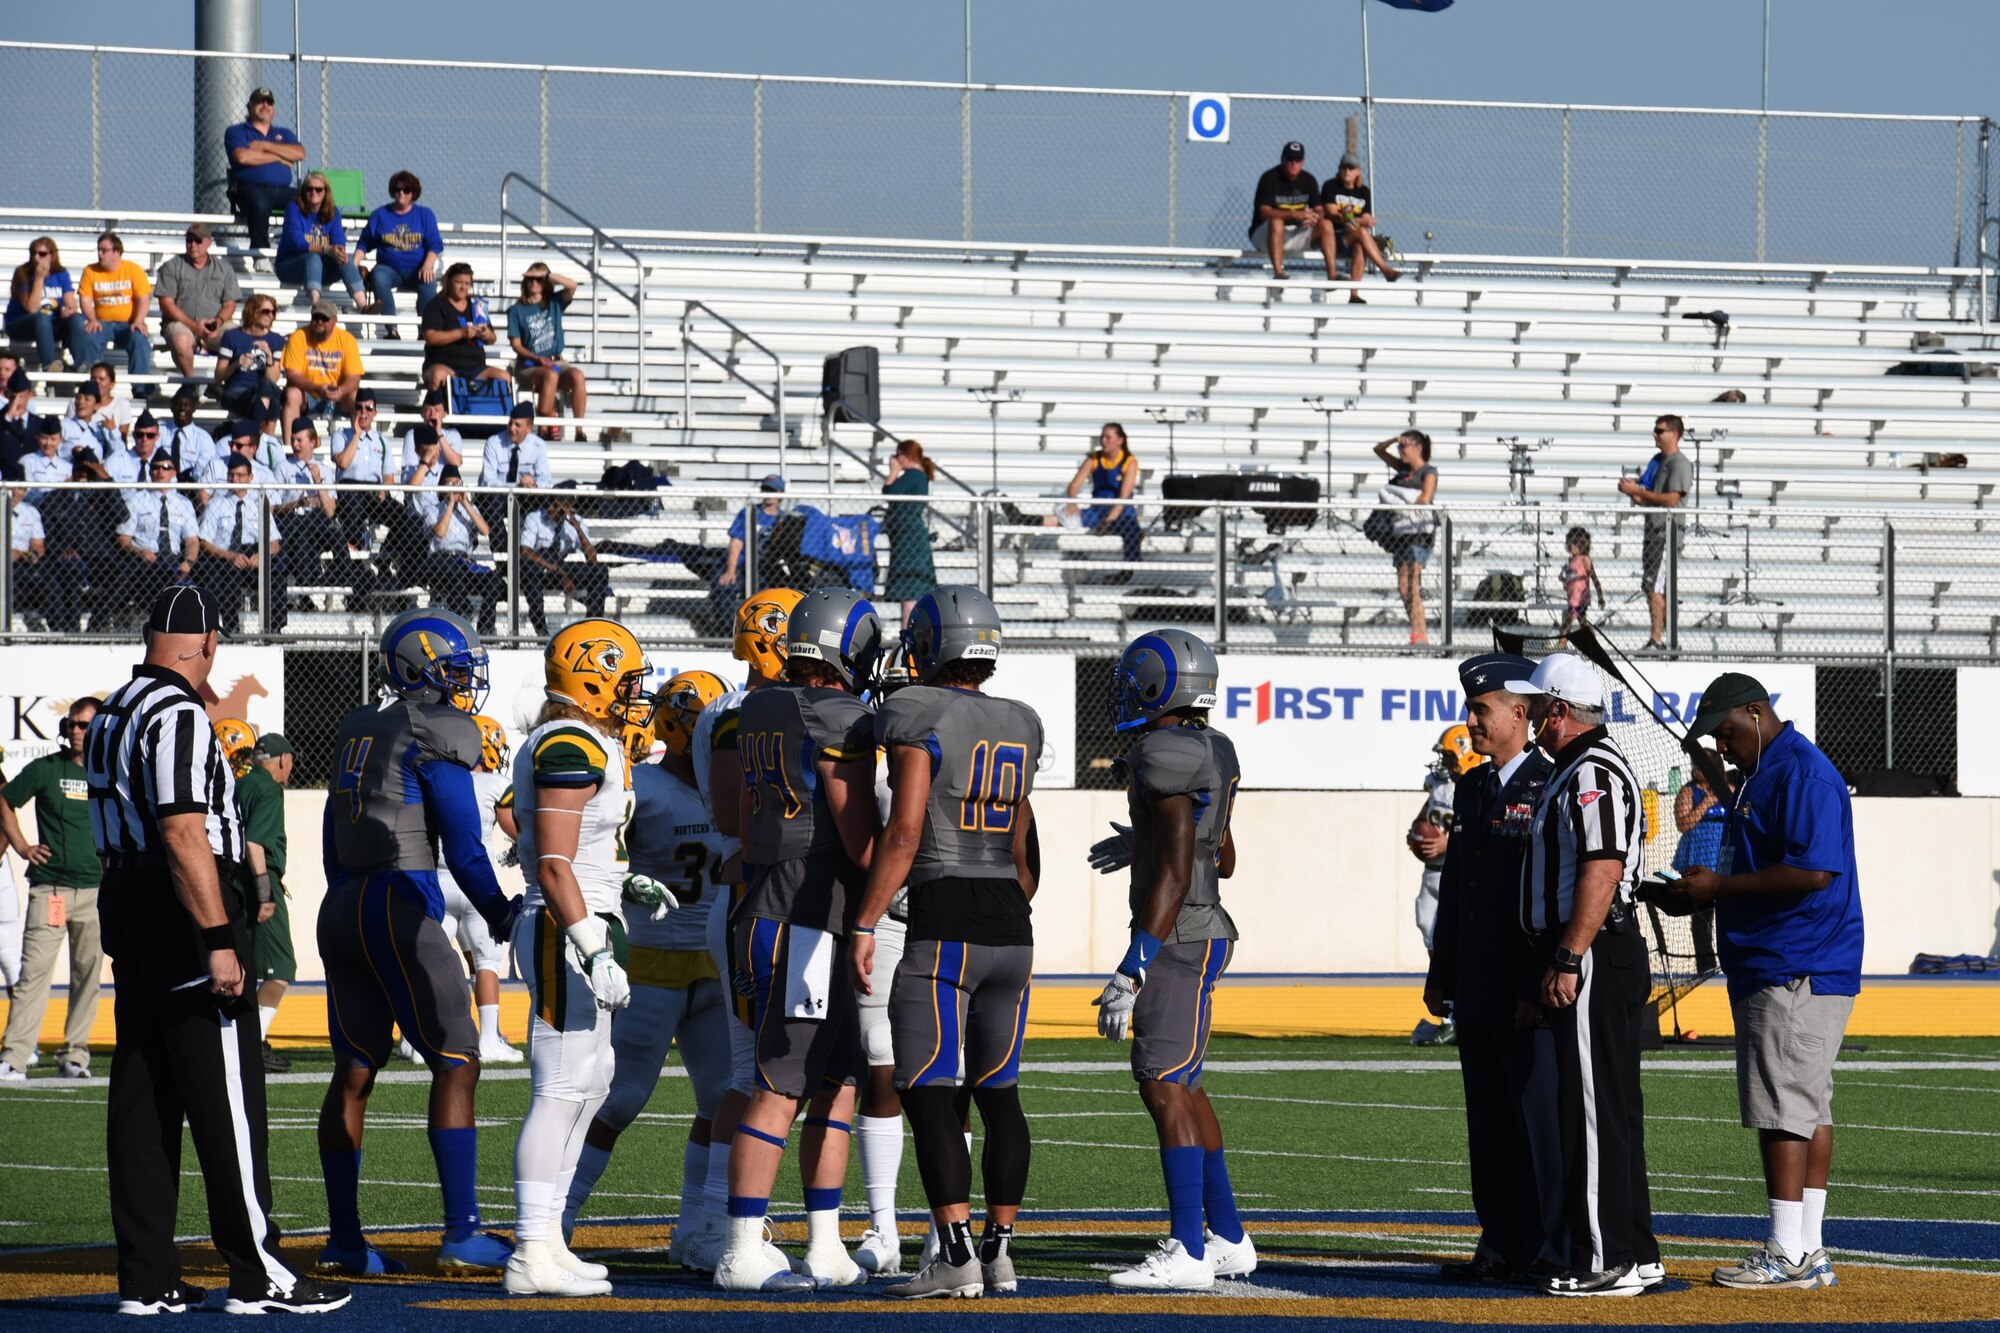 U.S. Air Force Col. Ricky Mills, 17th Training Wing commander, prepares for the coin toss to begin the Military Appreciation Day game at the Angelo State University’s LeGrande Stadium in San Angelo, Texas, Sept. 9, 2017. During the halftime ceremony, Mills also swore in approximately 50 delayed entry program individuals from different branches of the military. (U.S. Air Force photo by Airman Zachary Chapman/Released)